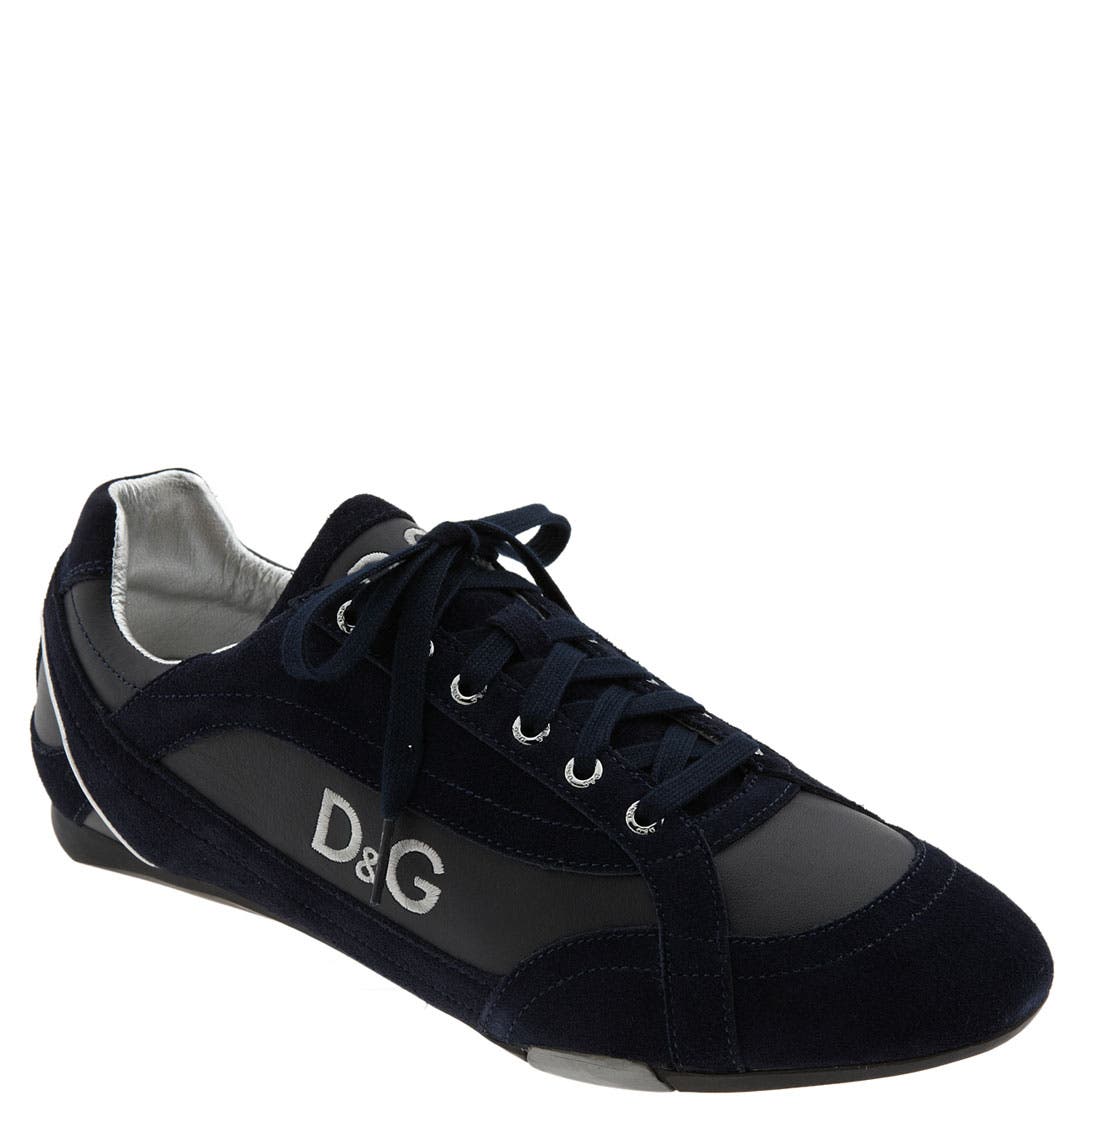 dolce and gabbana sneakers nordstrom